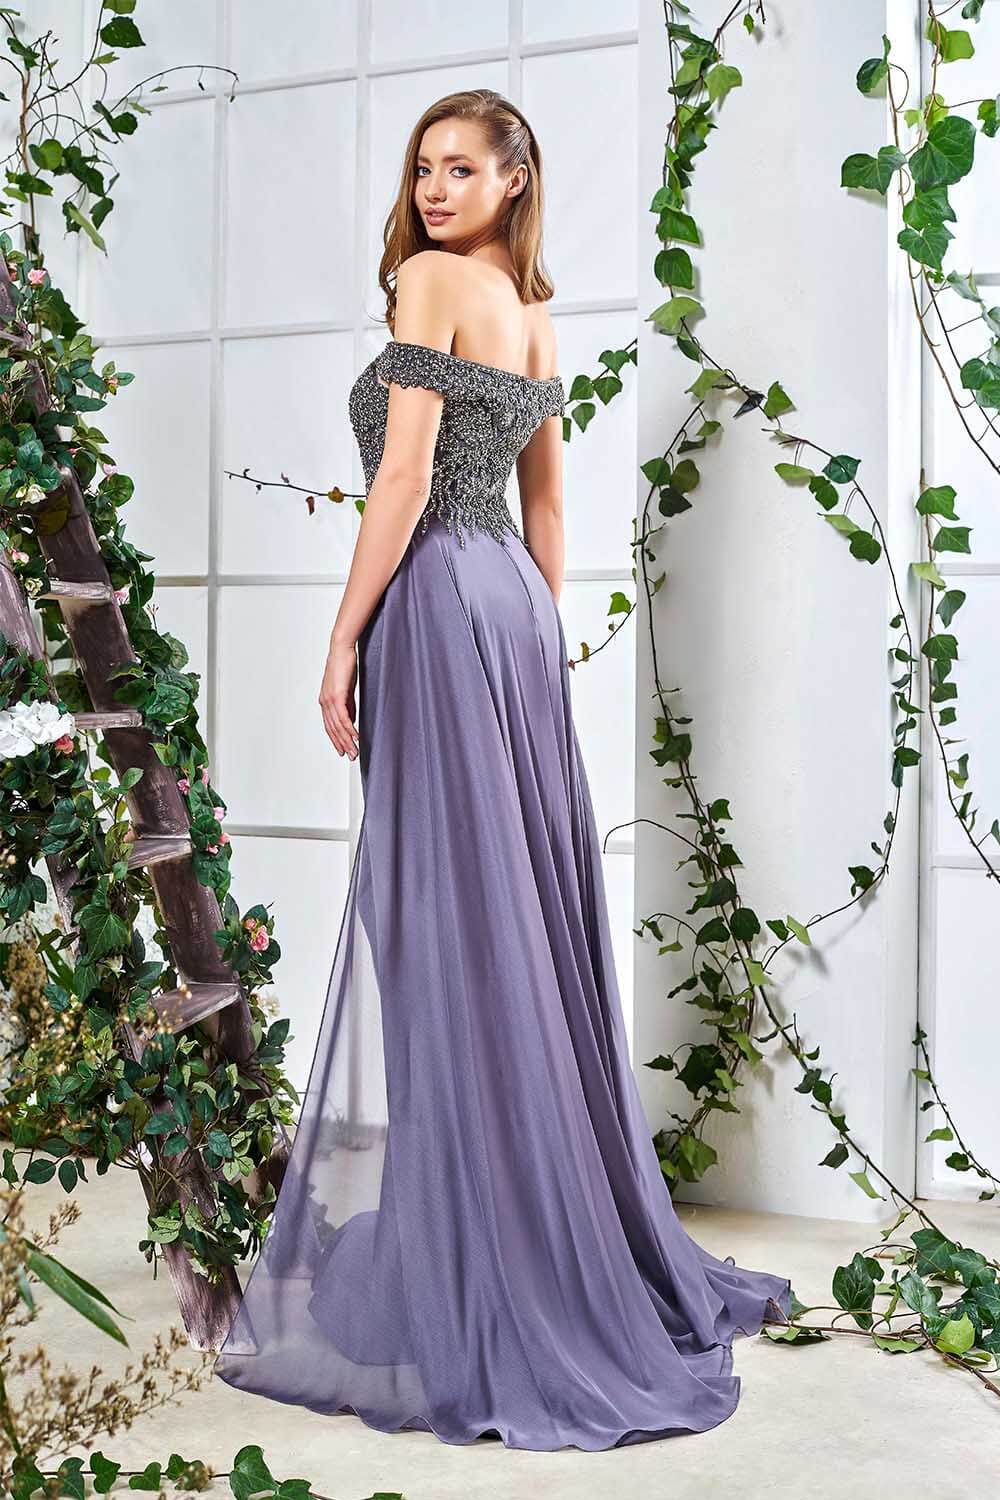 Boat Neck Tulle Caped Purple Evening Dress with Leg Slit